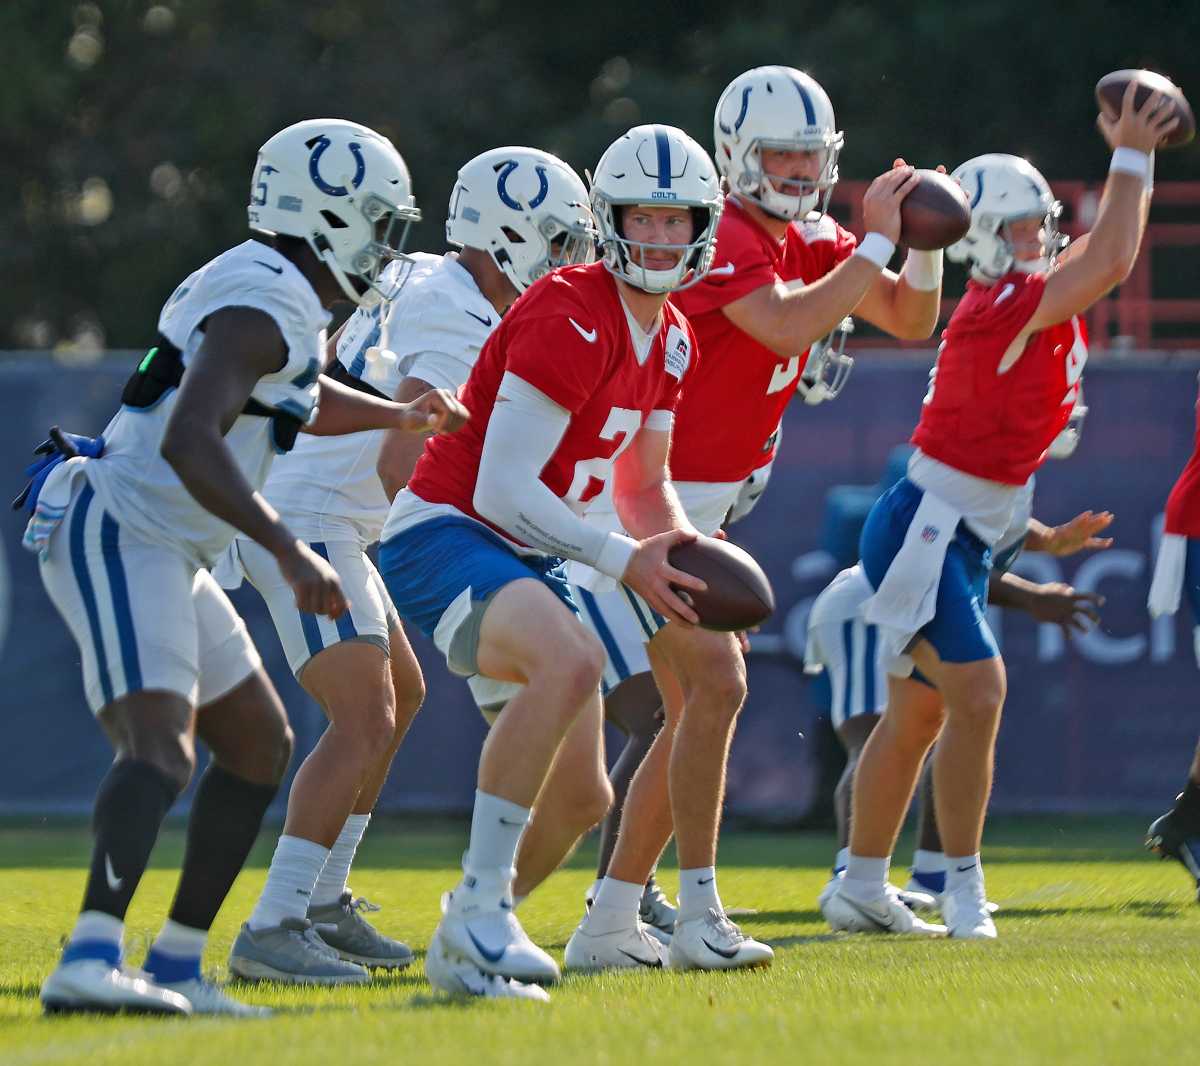 Quarterback Carson Wentz (#2), center, runs drills during Colts camp practice Tuesday, Aug. 24, 2021 at Grand Park Sports Campus in Westfield. Colts Camp Practice Continues At Grand Park Sports Campus In Westfield Tuesday Aug 24 2021